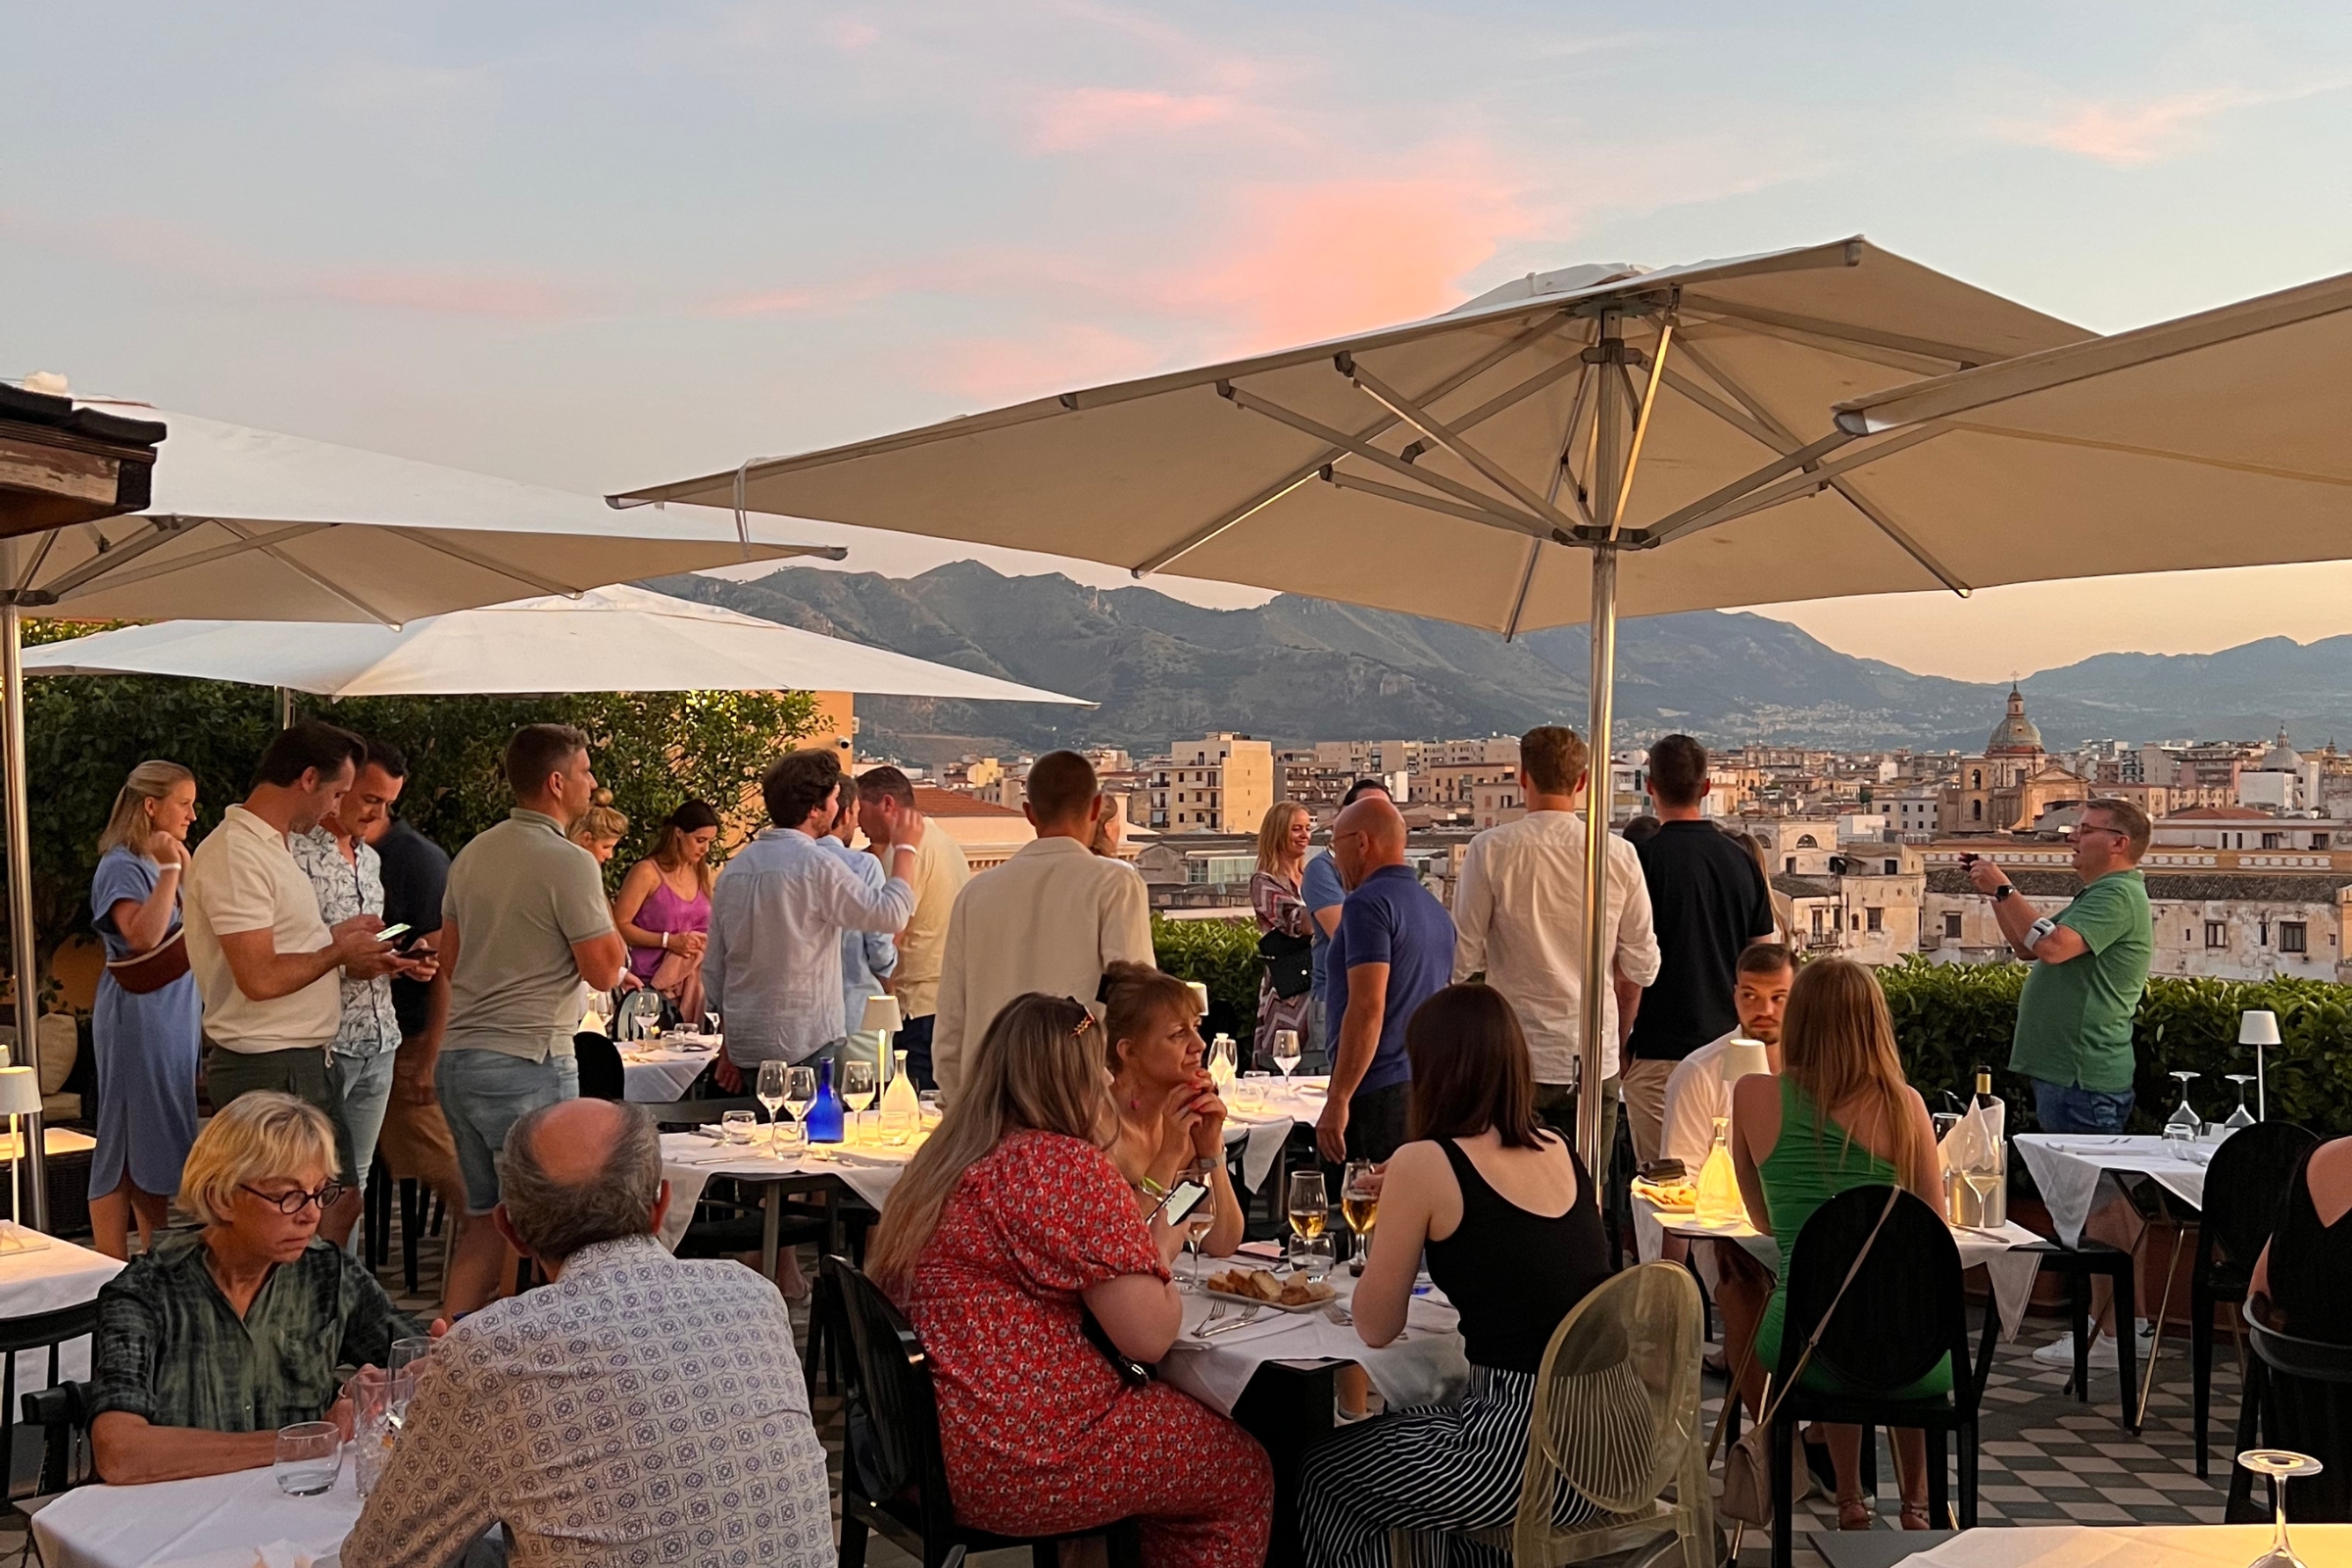 Ambasciatori Hotel Palermo: Your dinner with a dream view